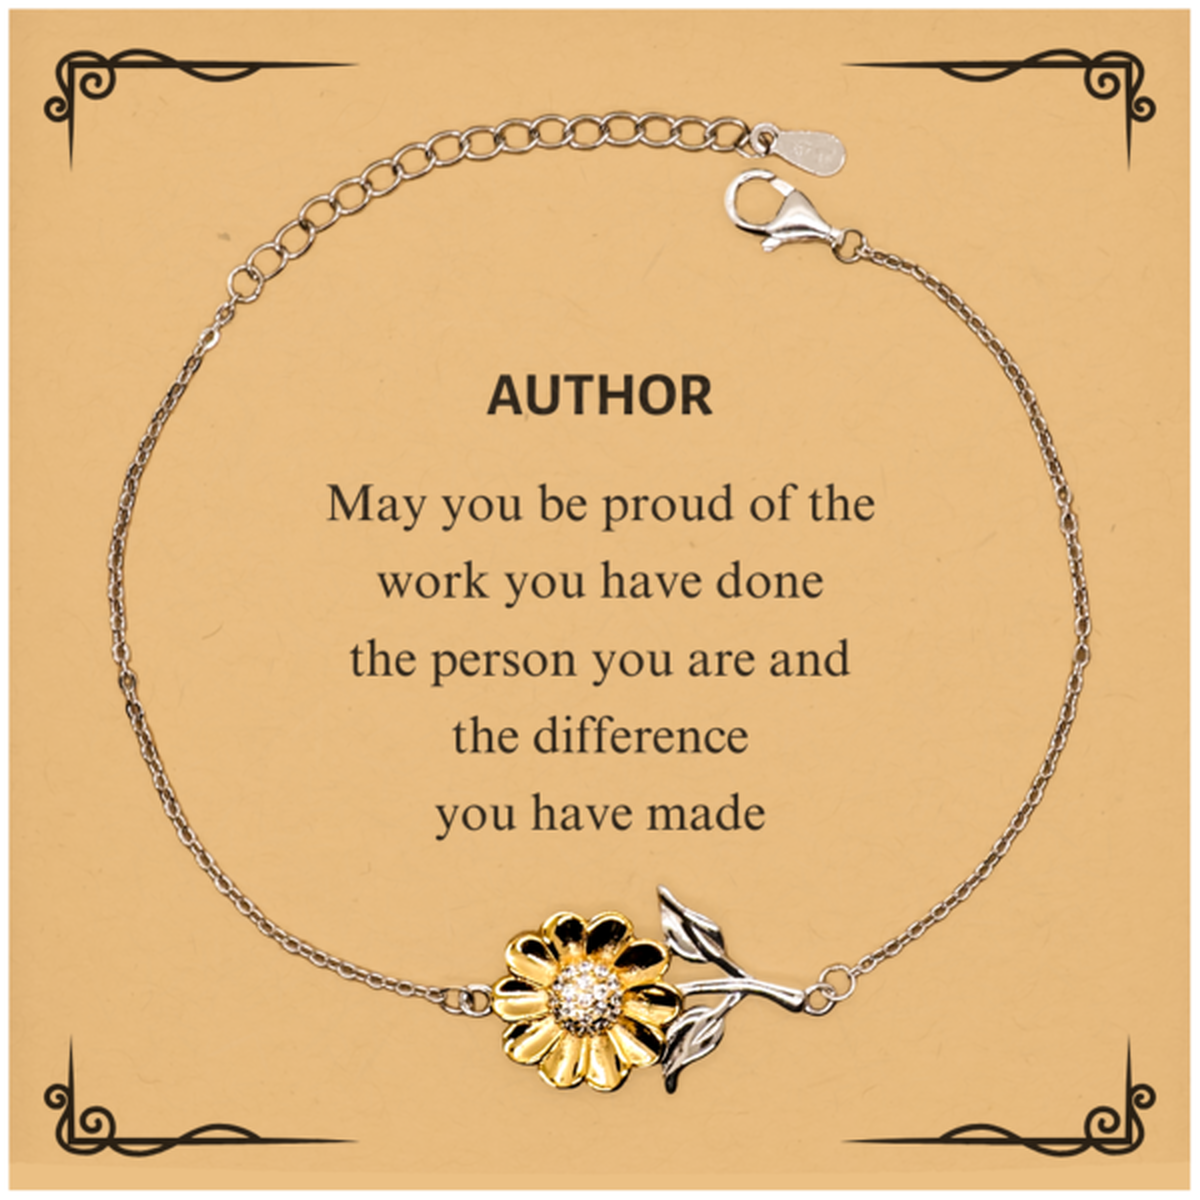 Author May you be proud of the work you have done, Retirement Author Sunflower Bracelet for Colleague Appreciation Gifts Amazing for Author